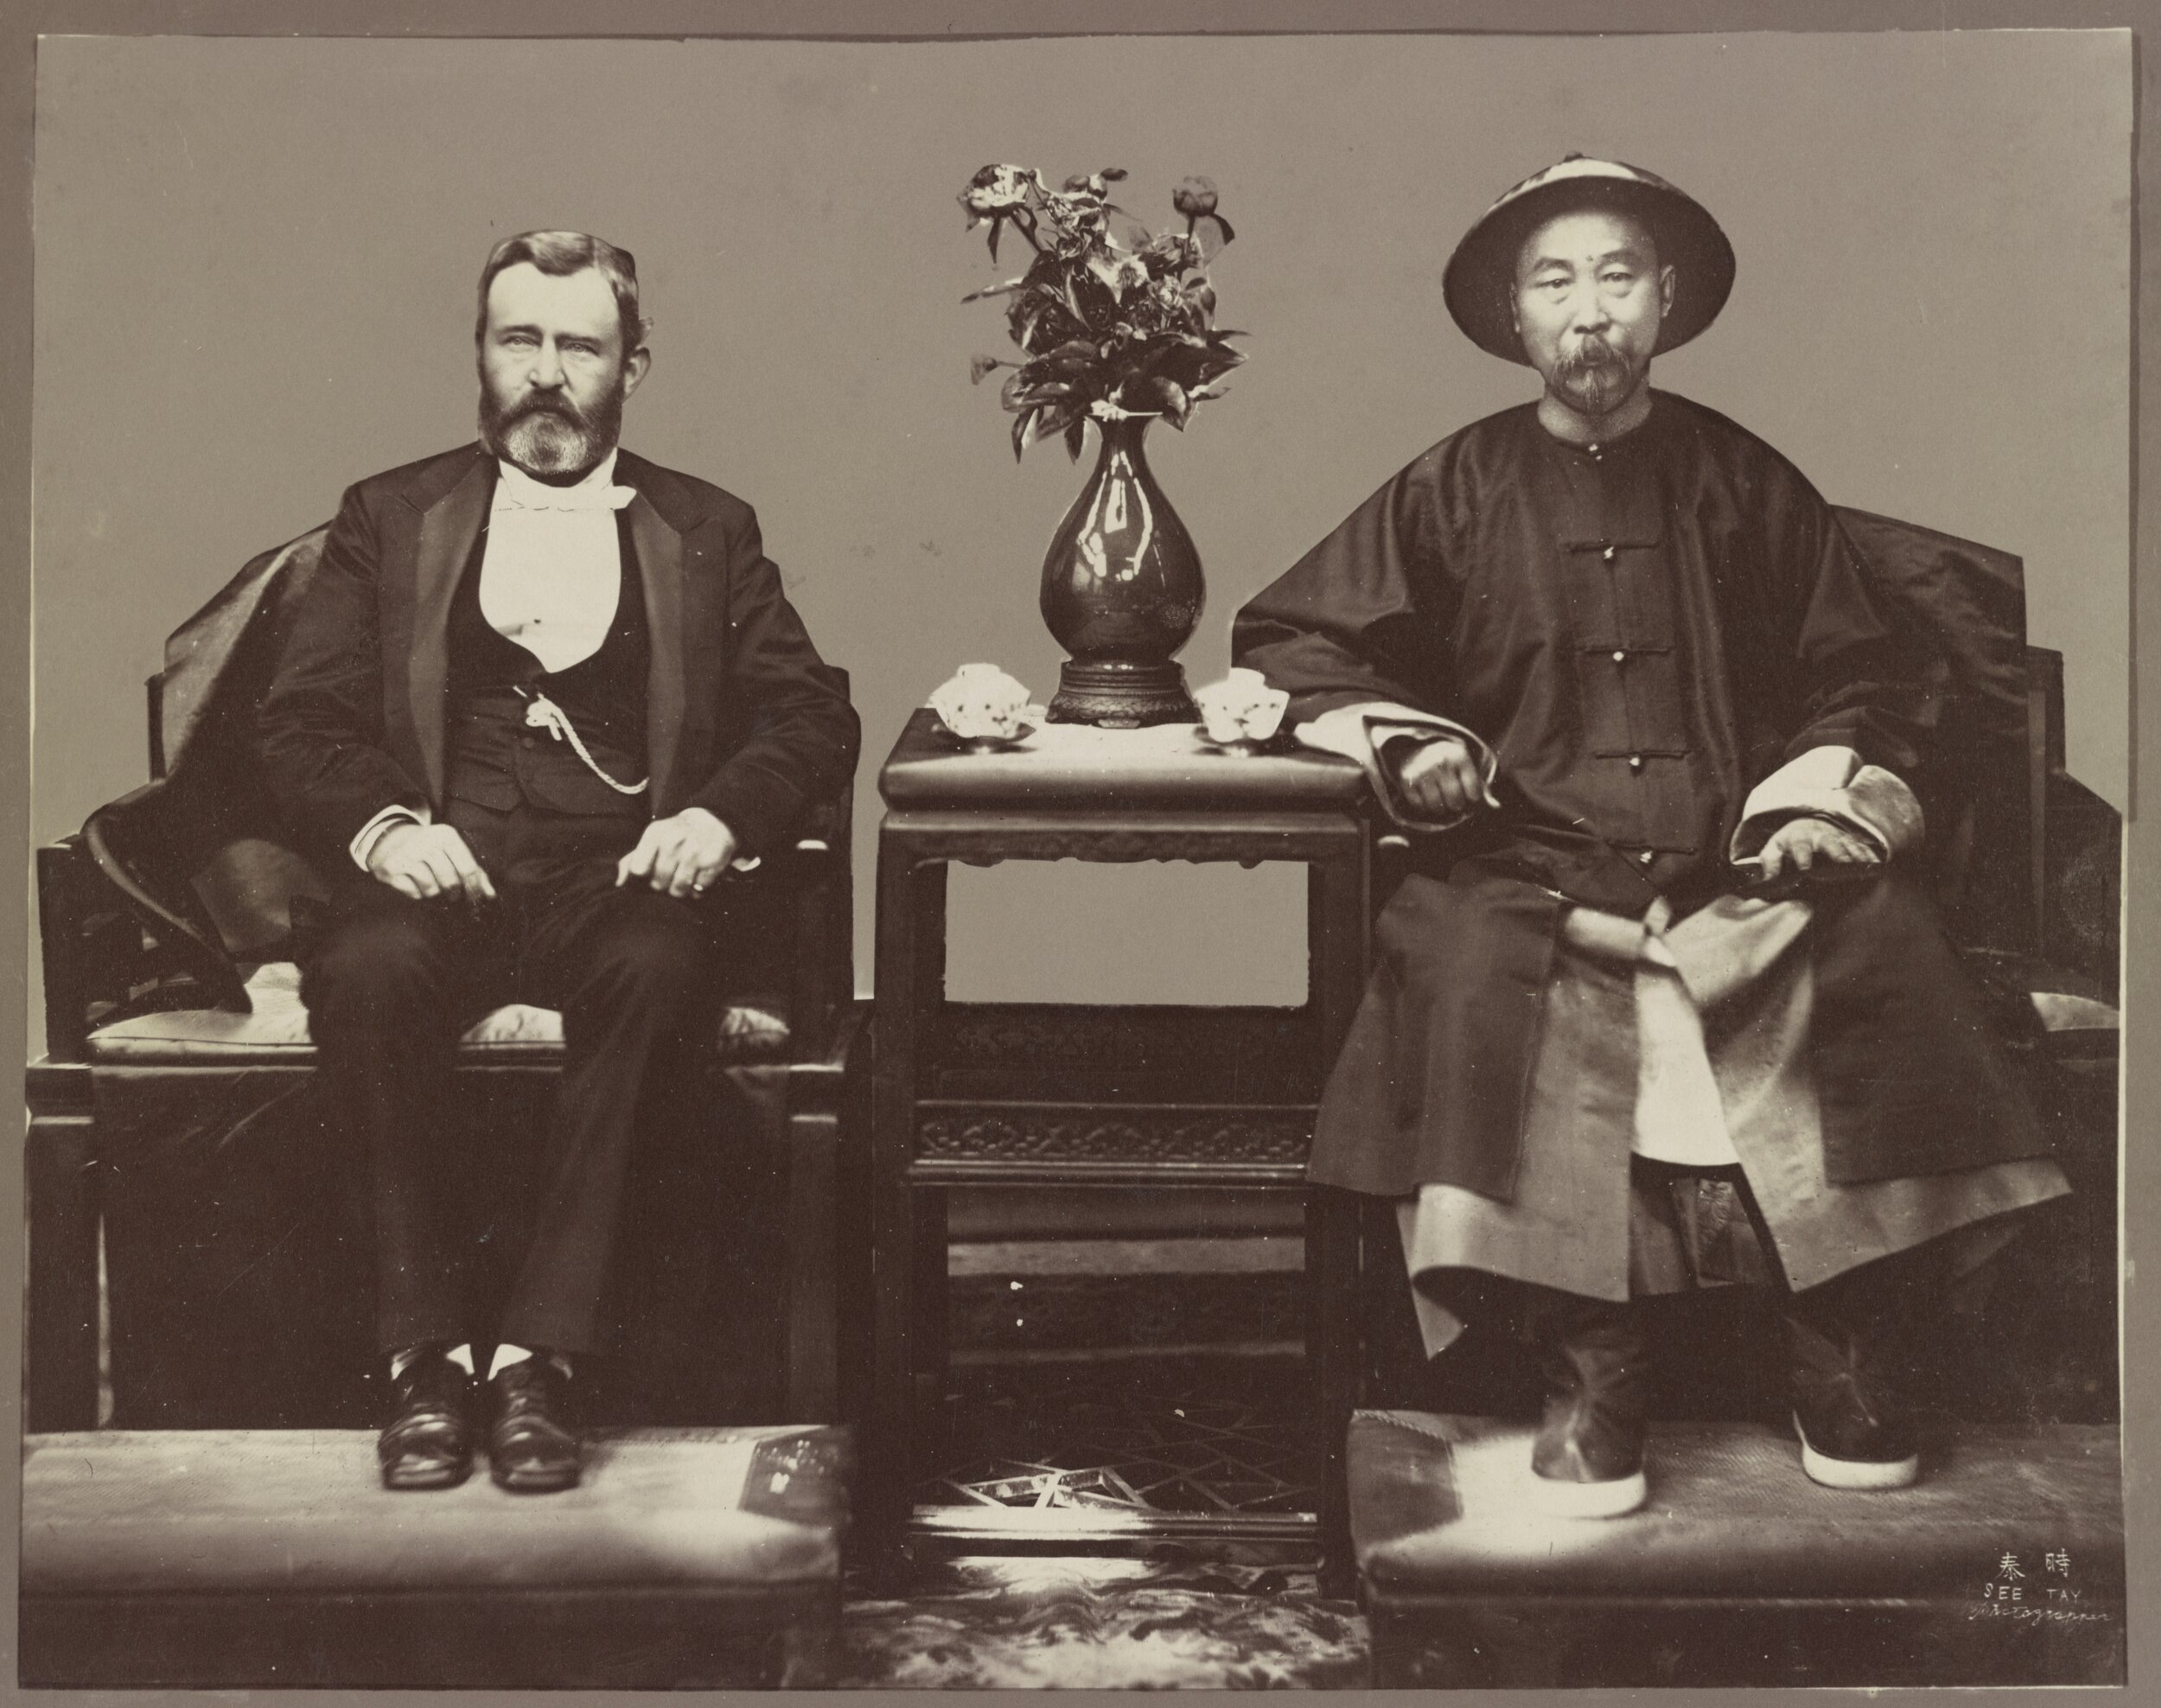  Many Americans don’t realize that the relationship predates by more than 100 years, Richard Nixon’s 1972 trip to China. Here is former US President Ulysses S. Grant with Chinese viceroy Li Hongzhang in 1879. 